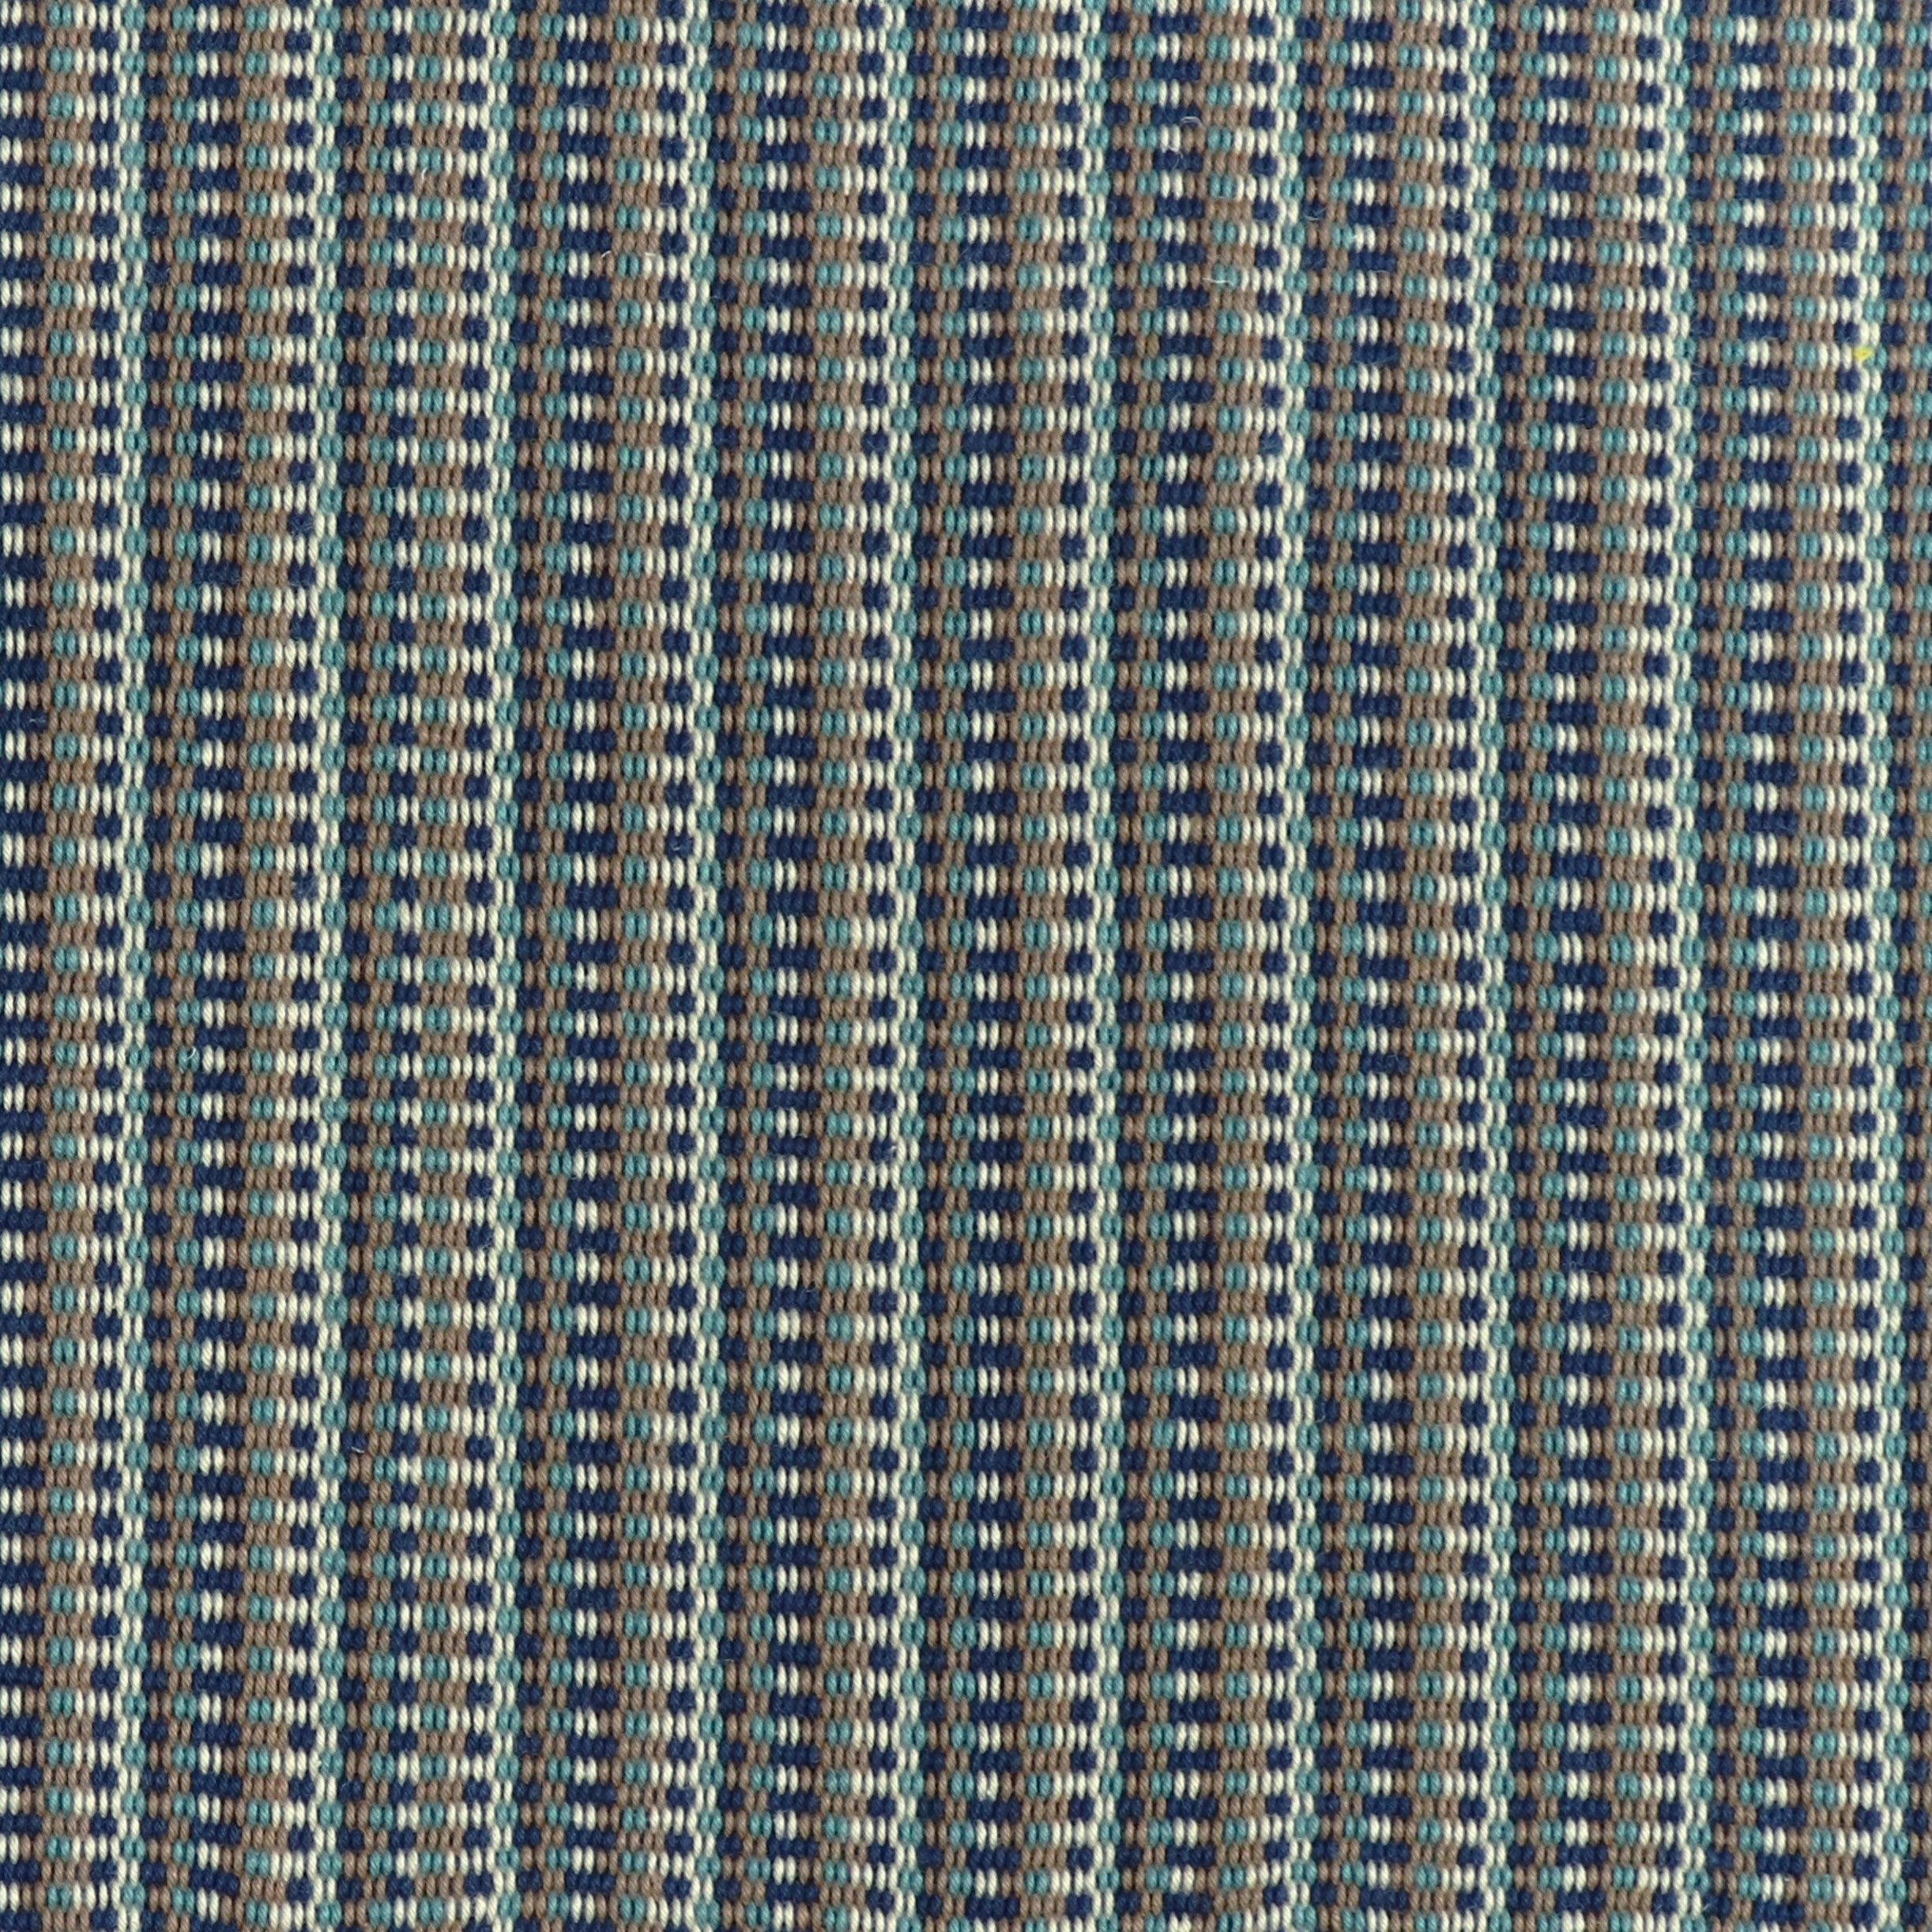 Detail of a hand-woven cotton fabric in an intricate grid pattern in shades of navy, brown, teal and white.